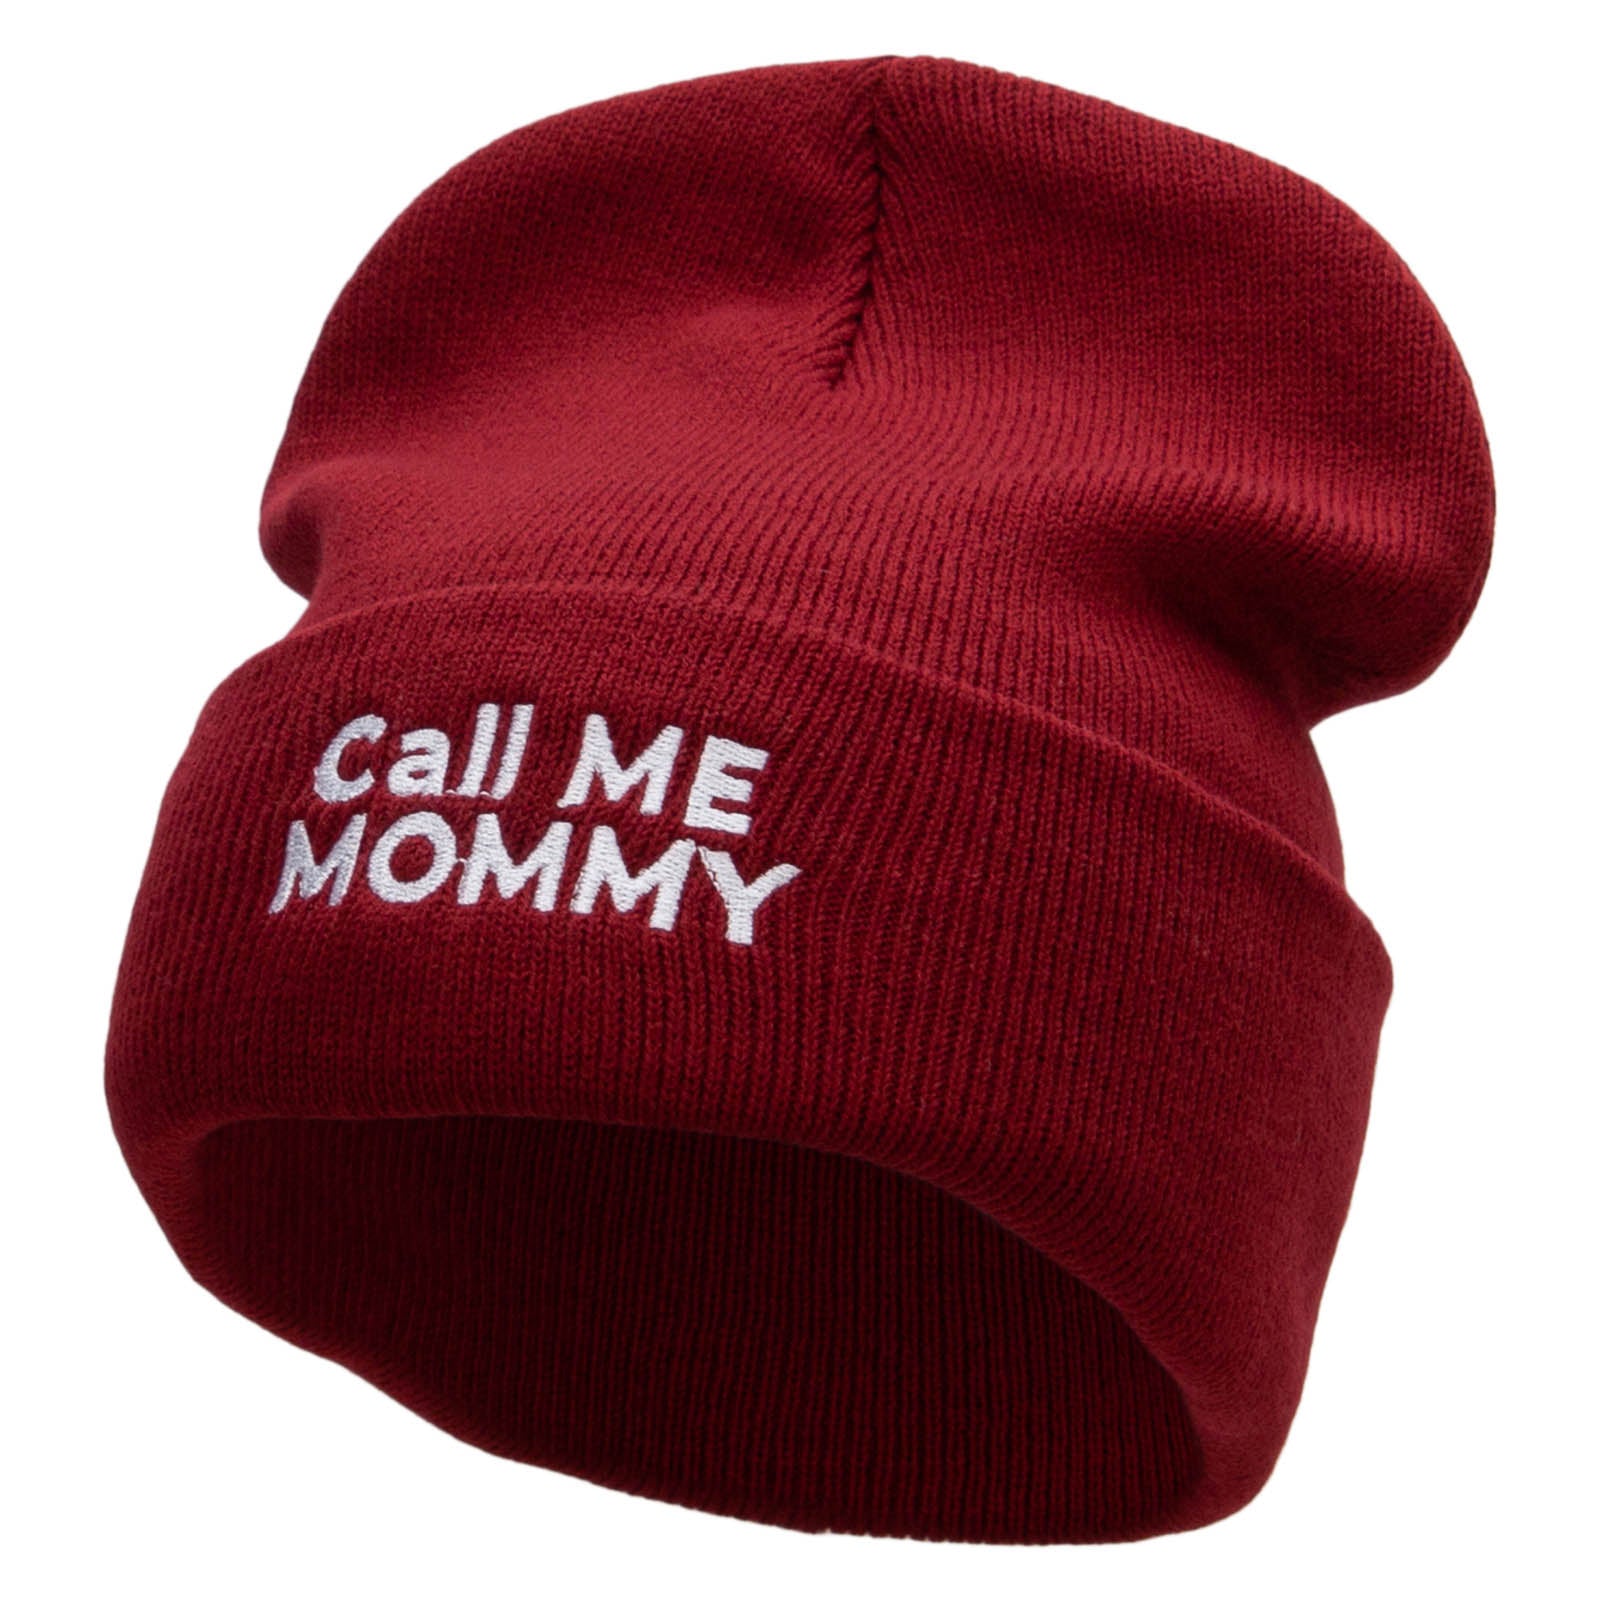 Call Me Mommy Embroidered 12 Inch Long Knitted Beanie - Maroon OSFM